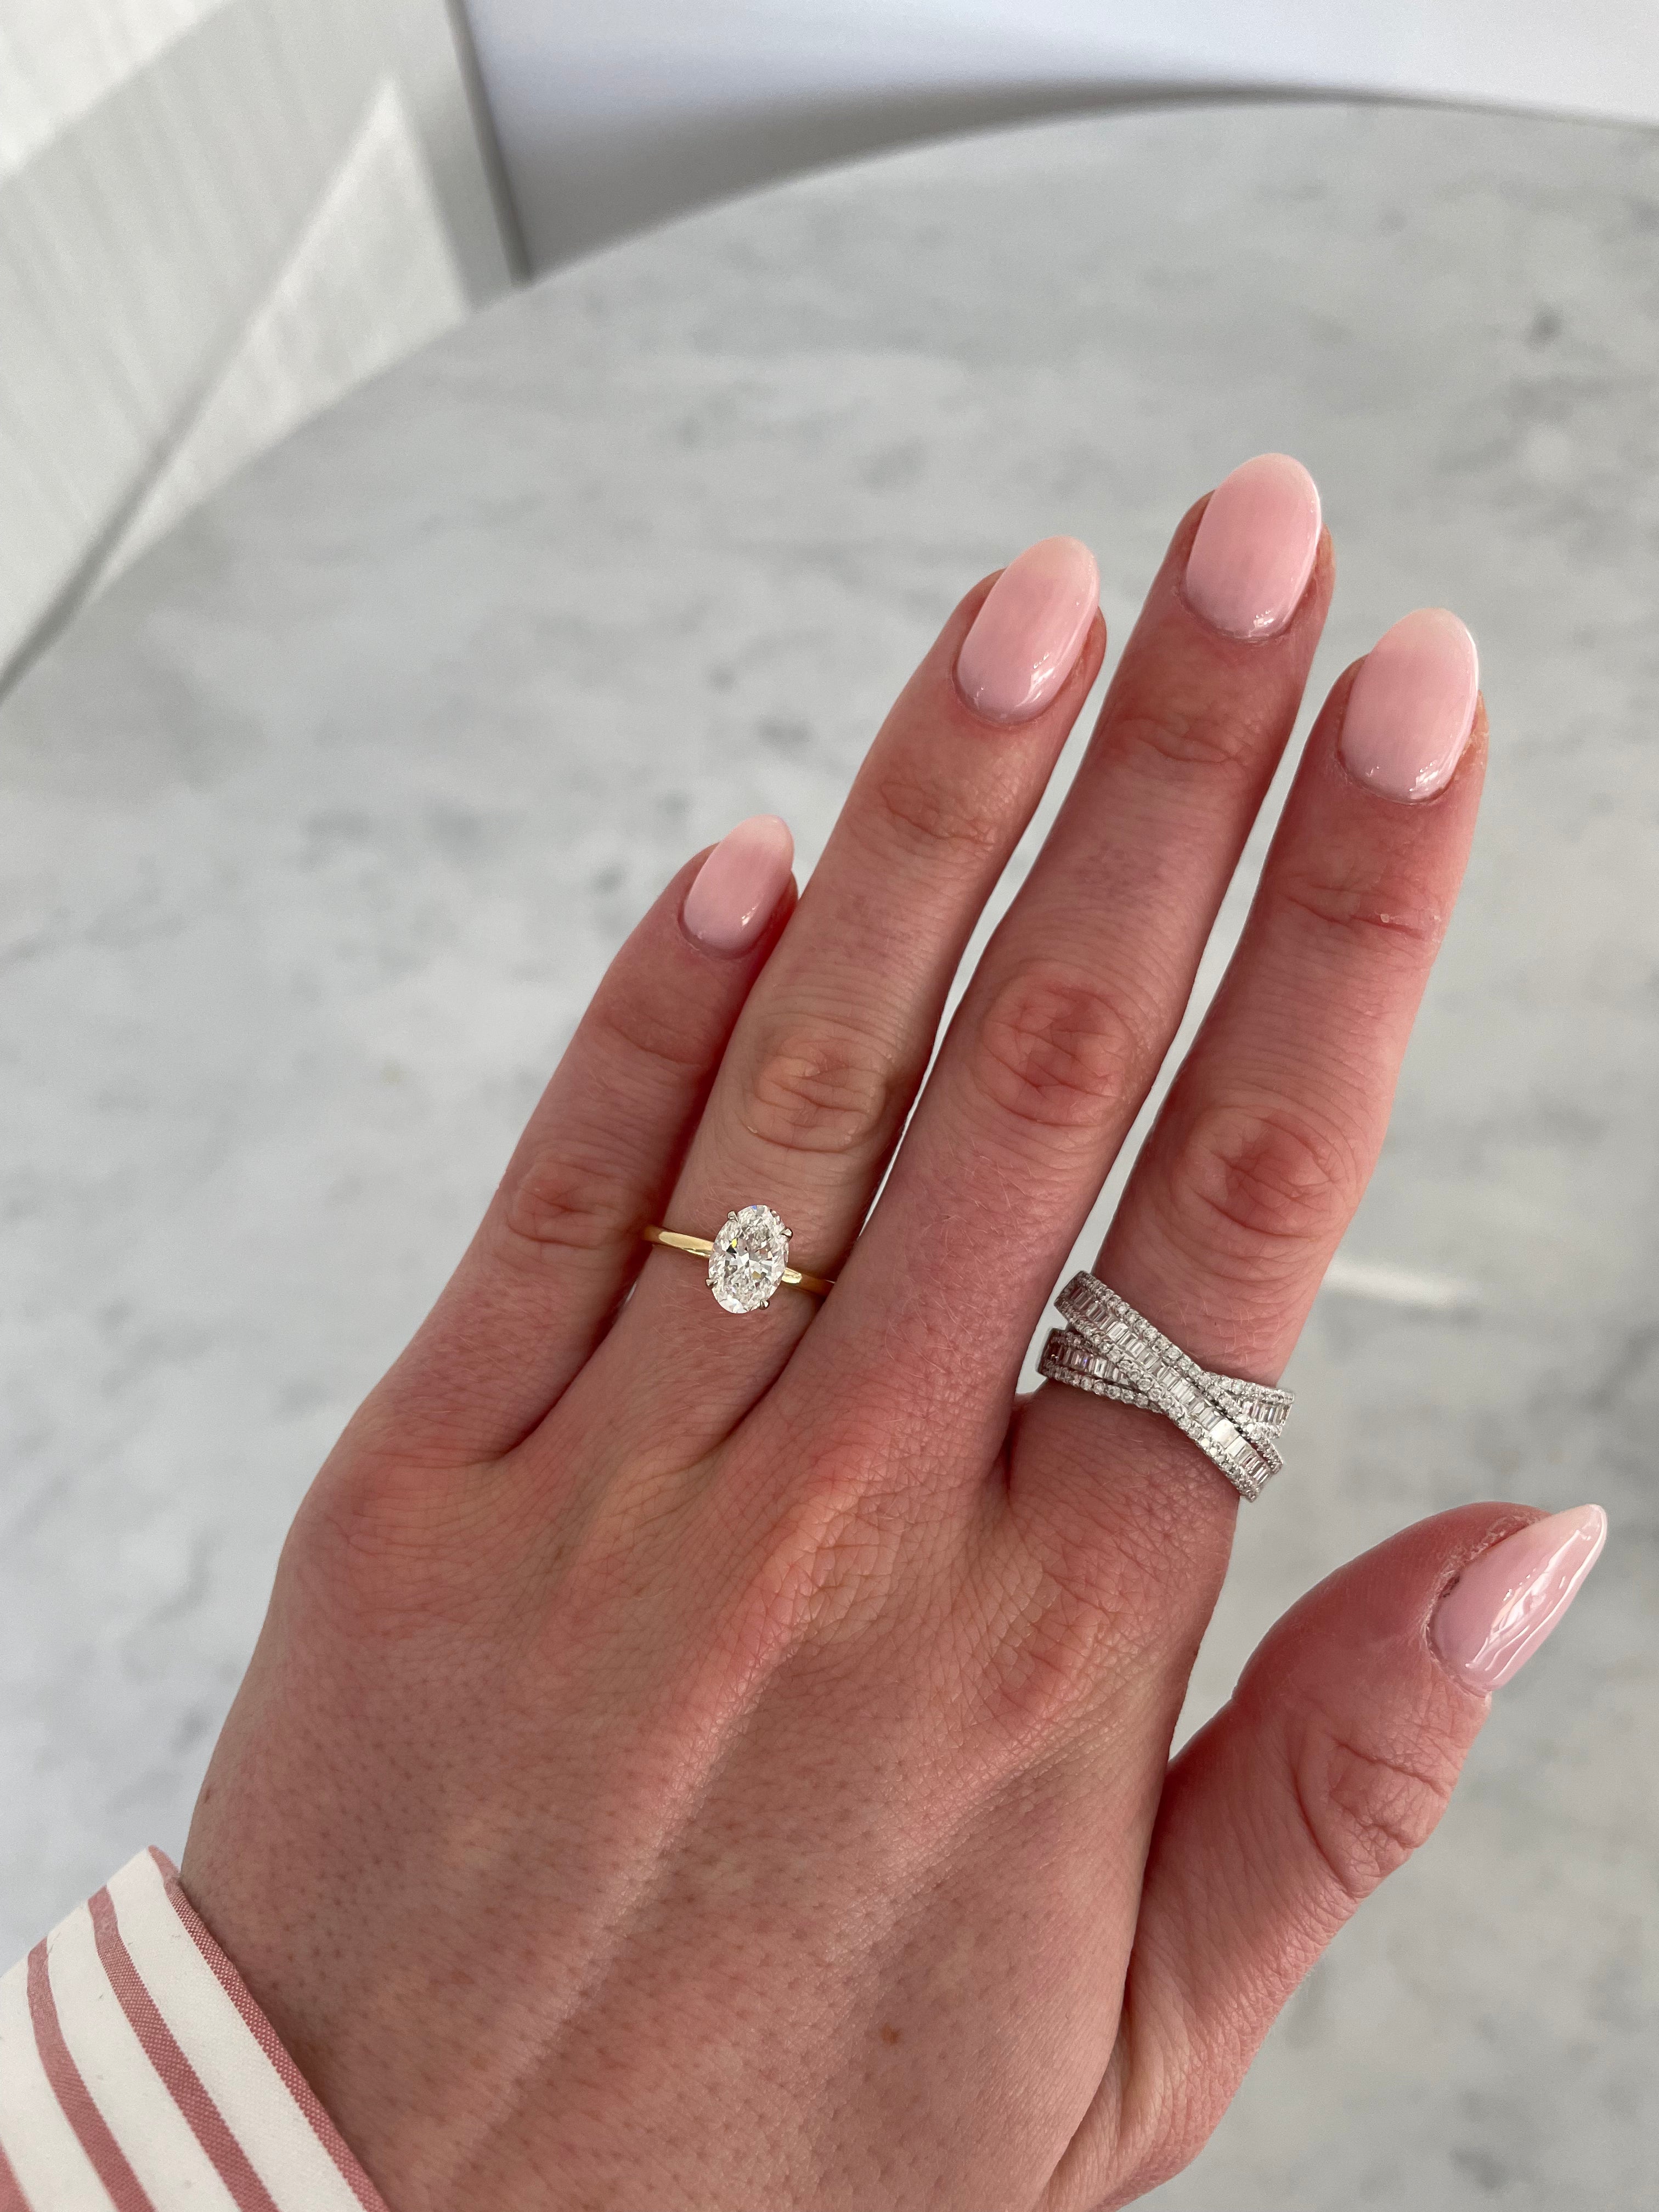 Oval Cut Engagement Ring with a Hidden Halo